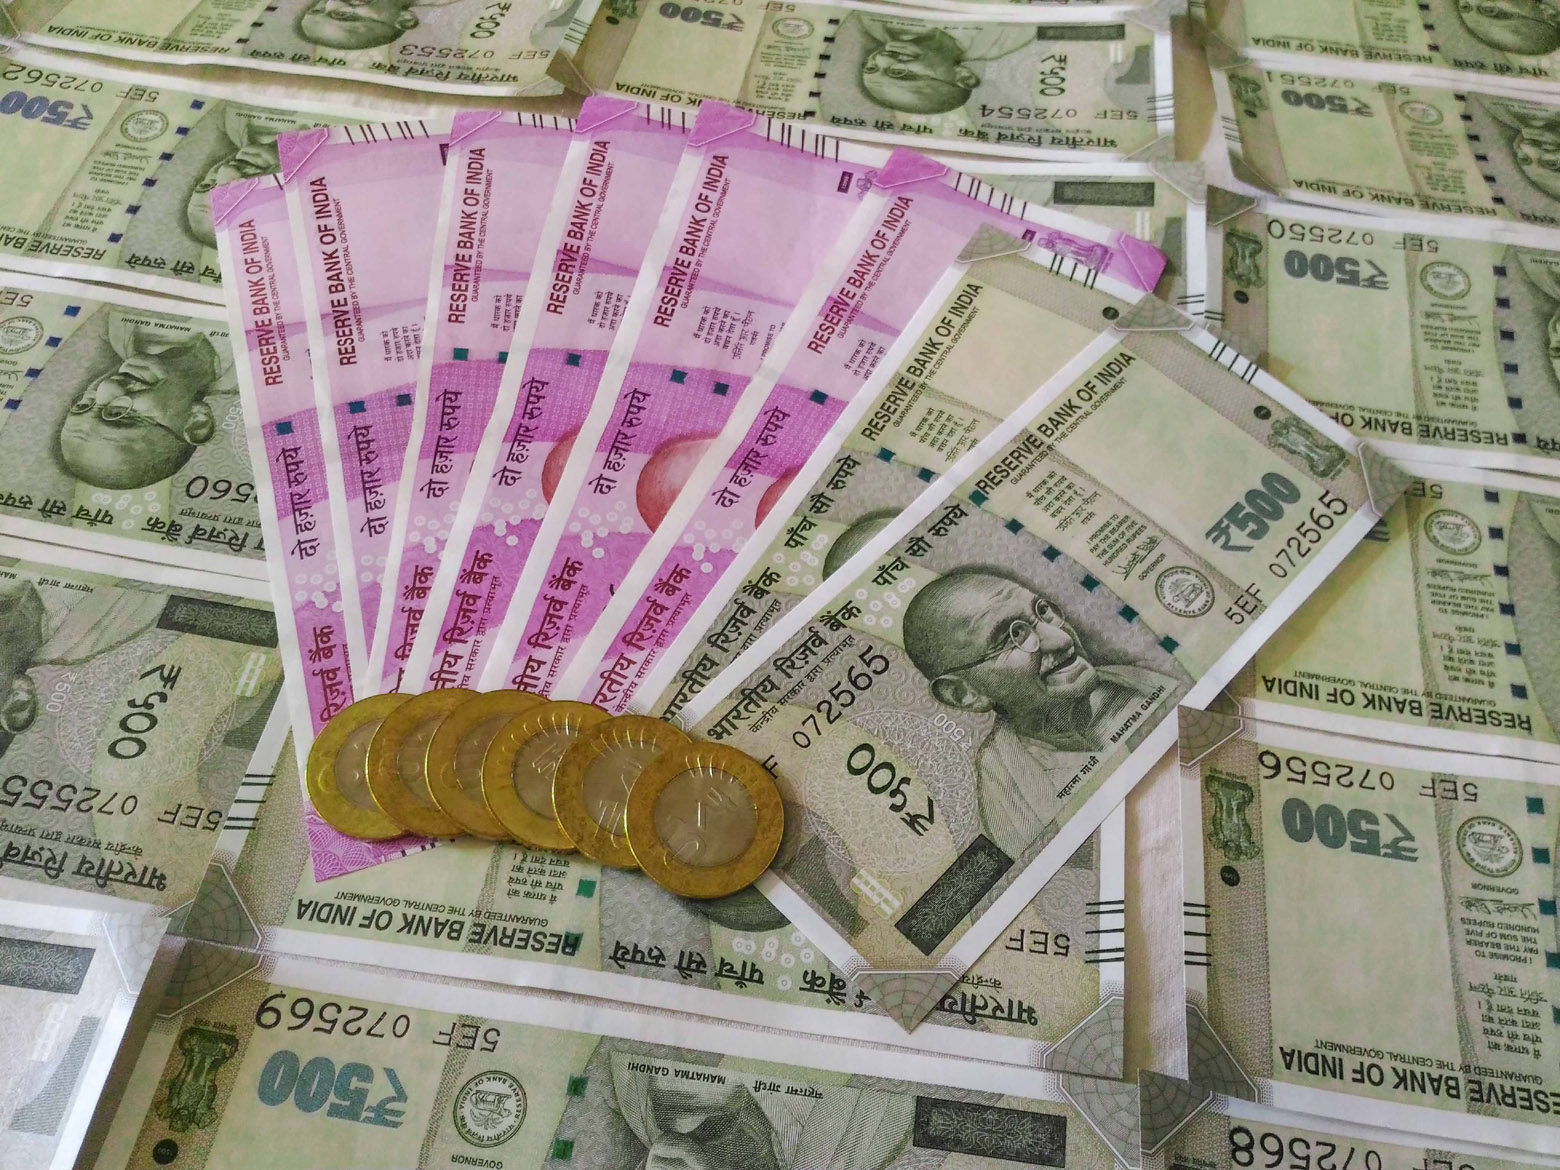 As many as 8,34,947 Fake Indian Currency Notes (FICN) worth more than Rs 92 crore were seized in 2020, according to the Crime in India 2020 report by